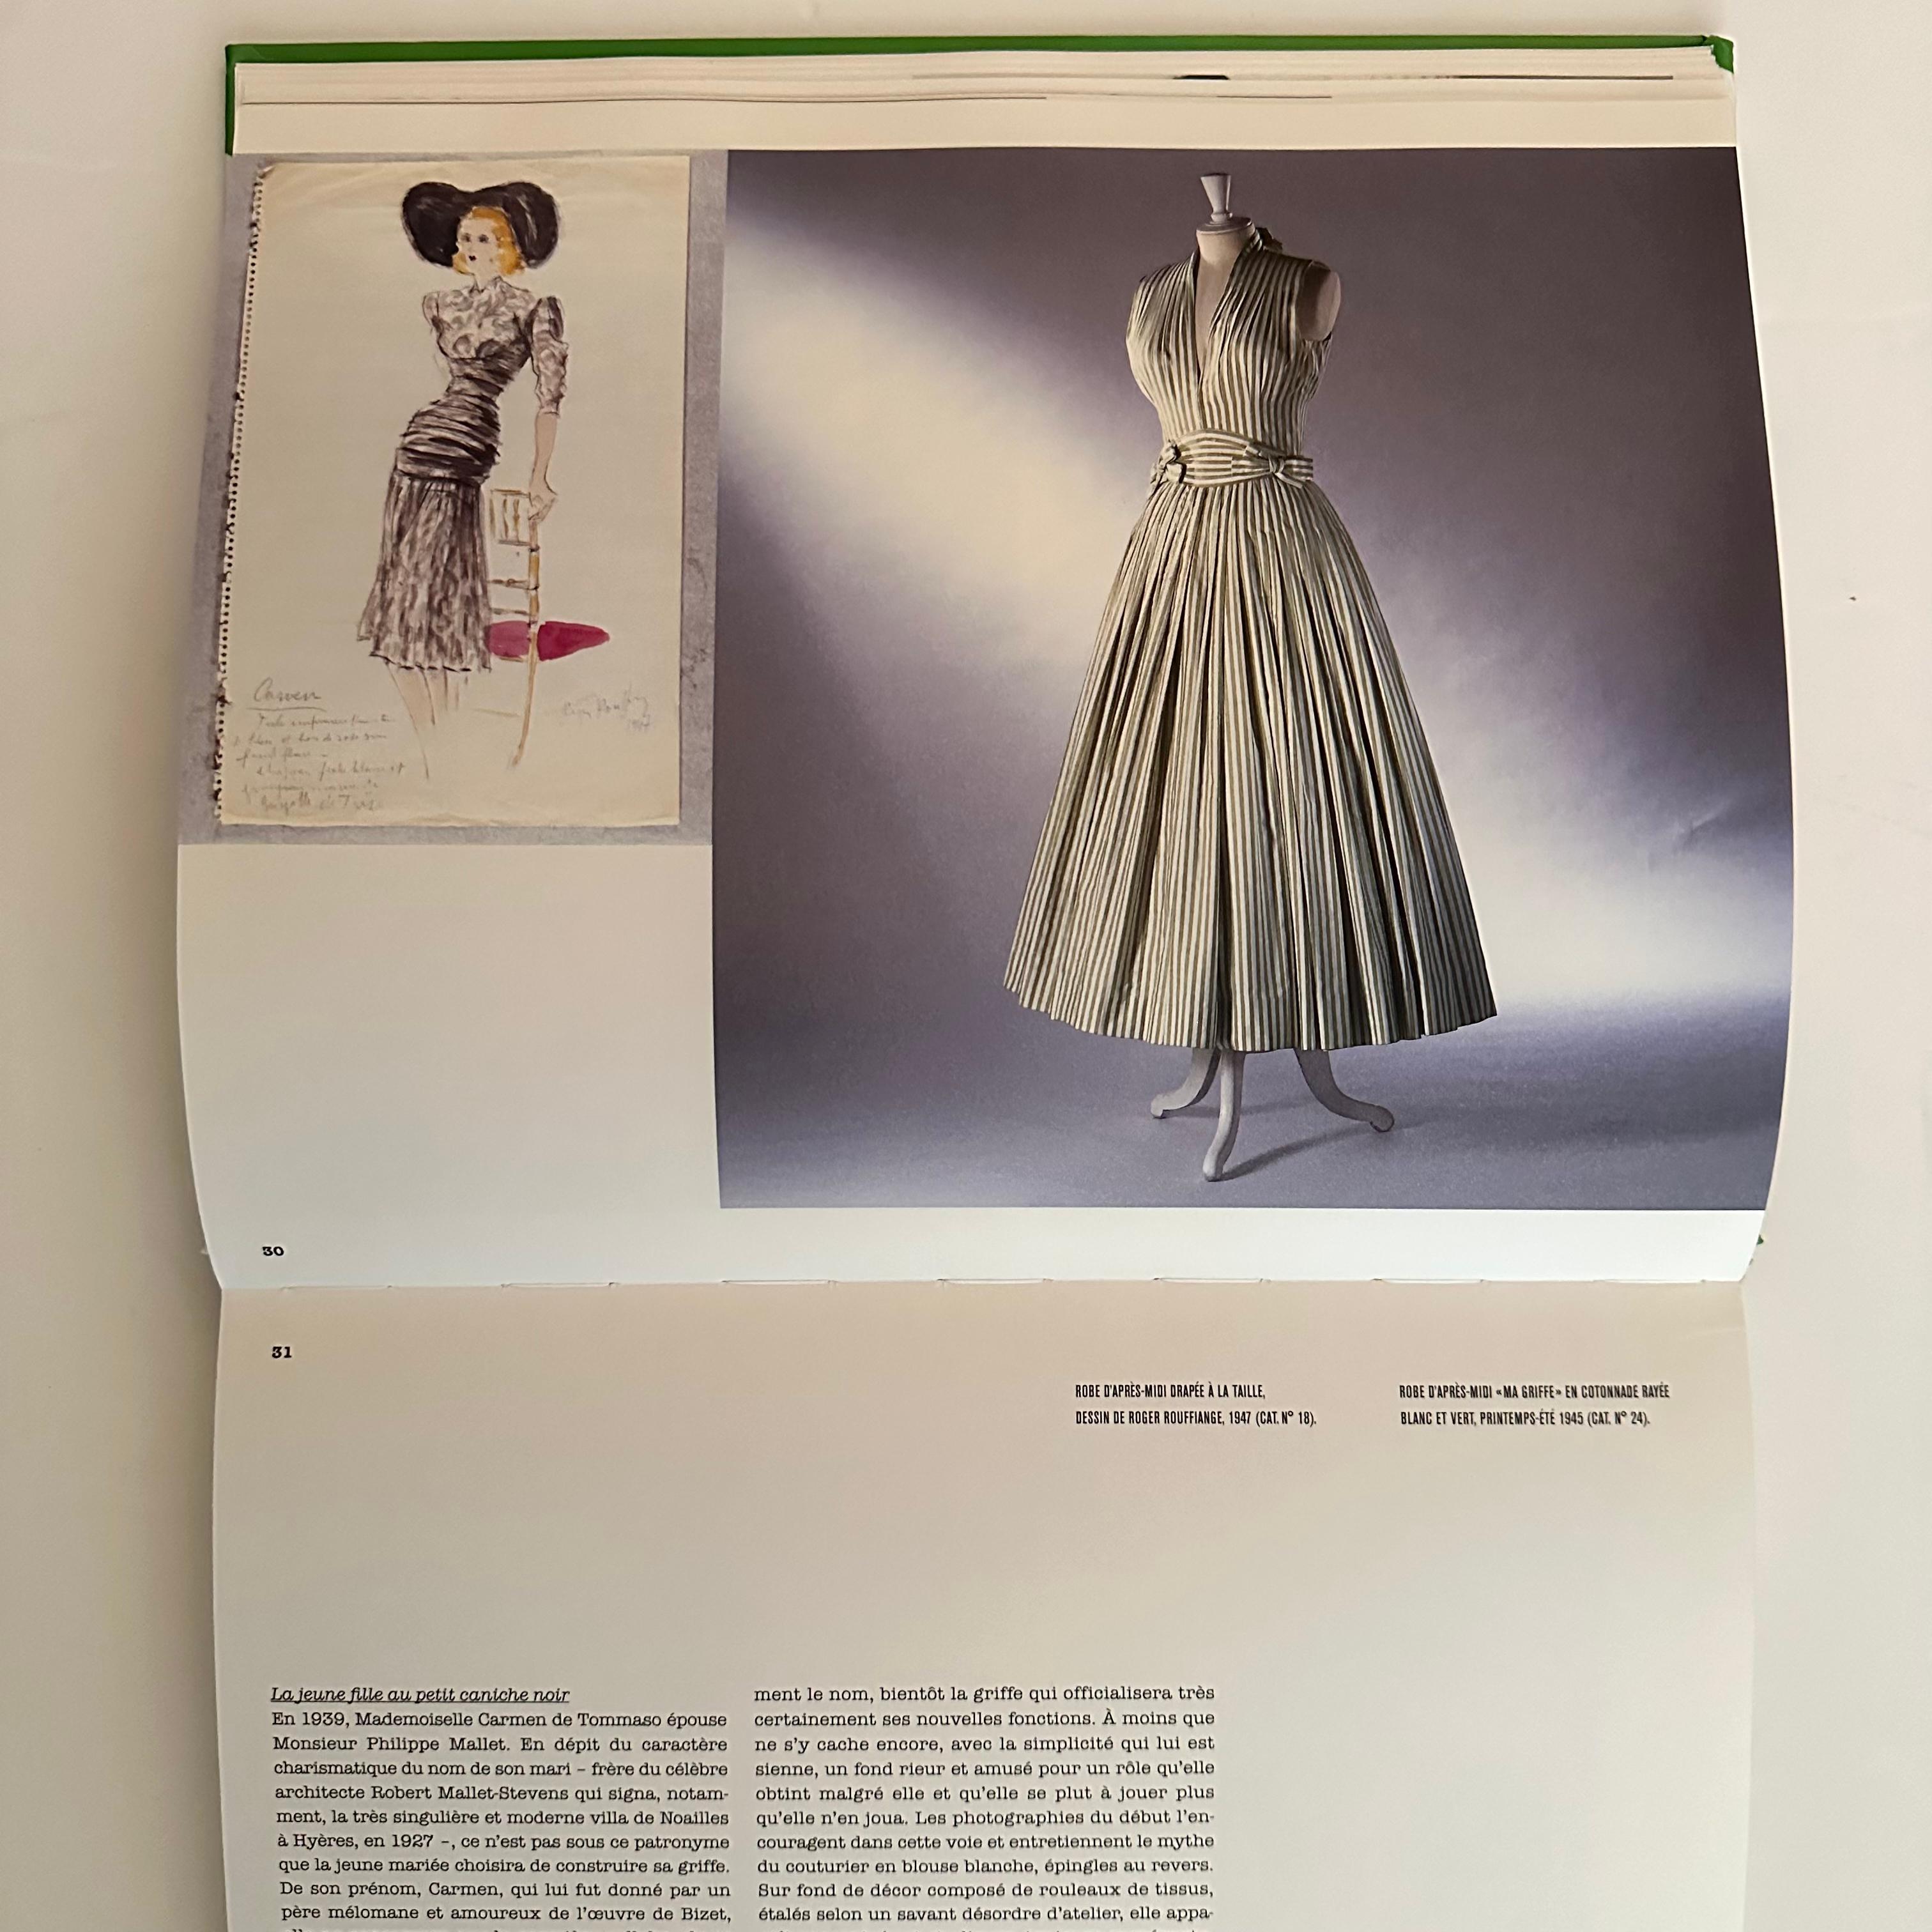 Published by Musée Galleria - Musée de la Mode de la Ville de Paris, 1st edition 2002 padded Hardcover with French text. 

This special volume was published alongside the exhibition Madame Carven, Grand Couturier by Musée Galleria. With a warm,